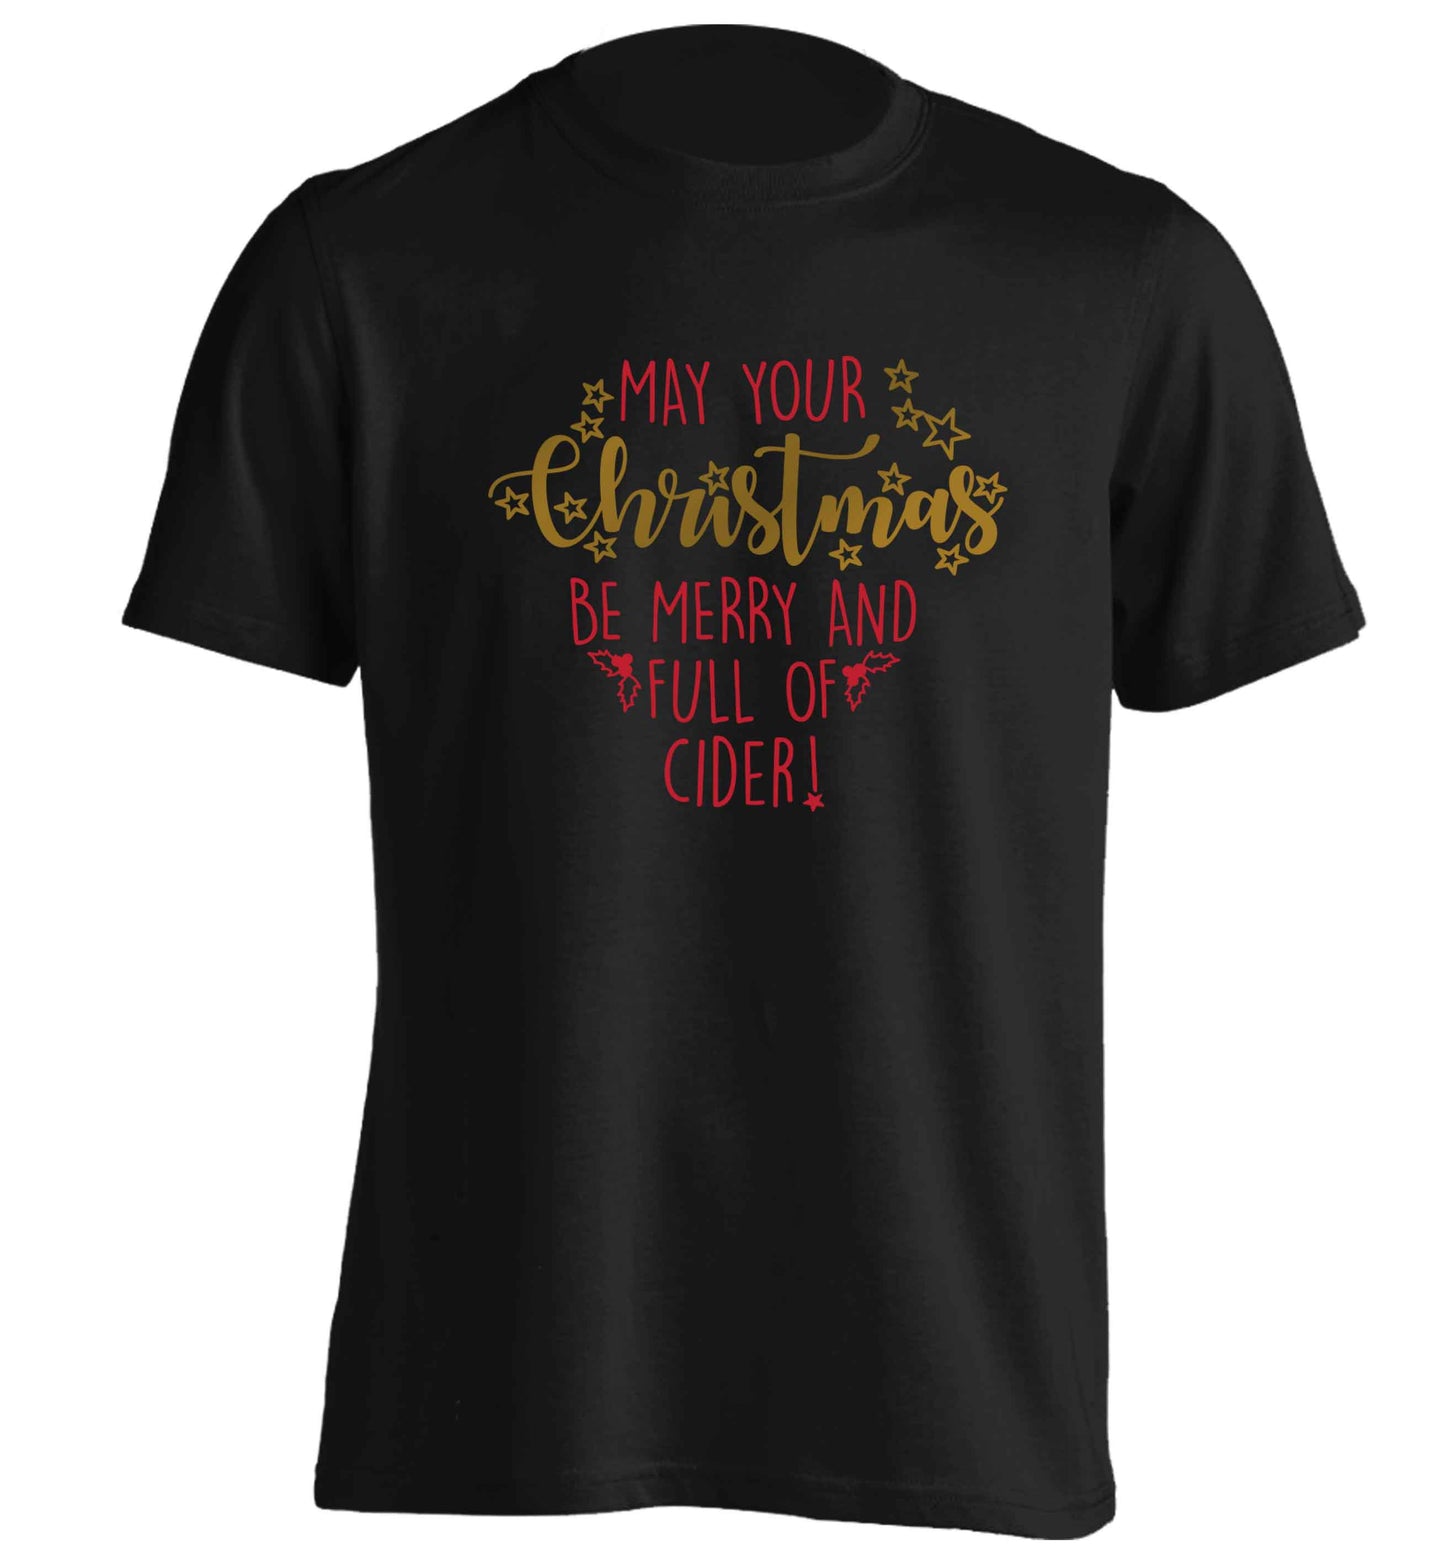 May your Christmas be merry and full of cider adults unisex black Tshirt 2XL